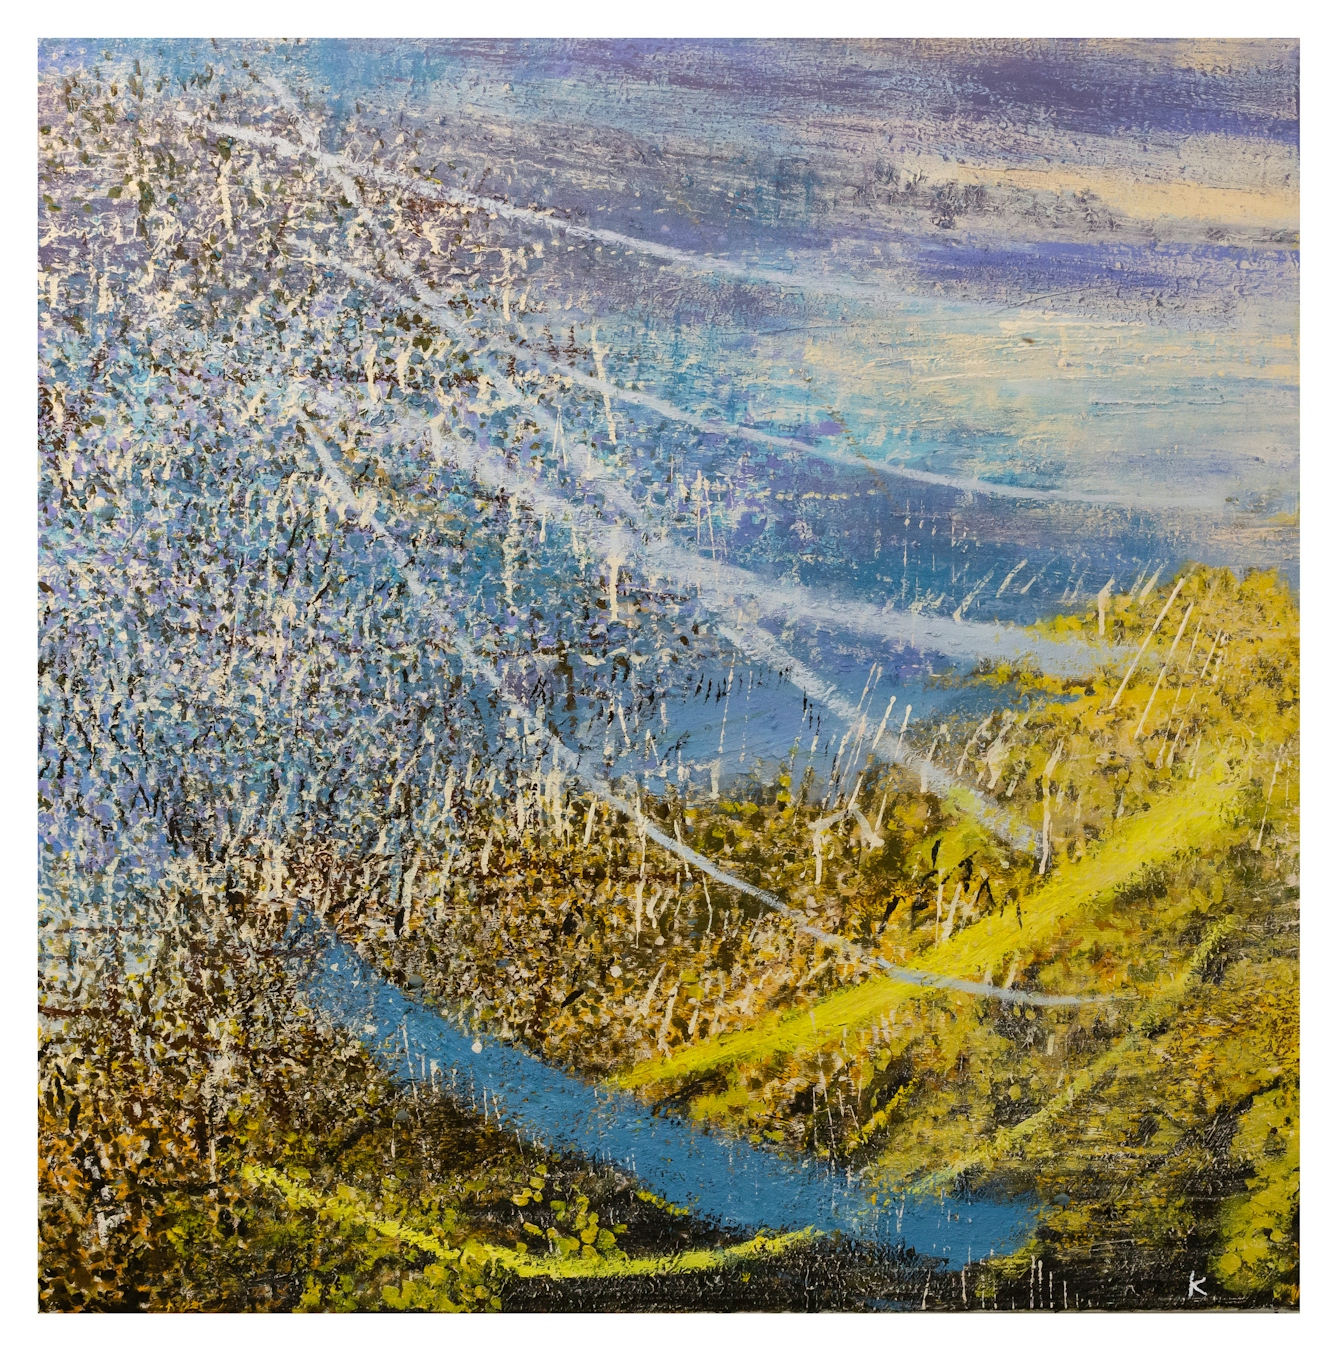 Oil on canvas artwork depicting an abstract, impressionist landscape made with heavily textured oil paint brushstrokes. The painting is made up of yellow, blue, brown and purple hues